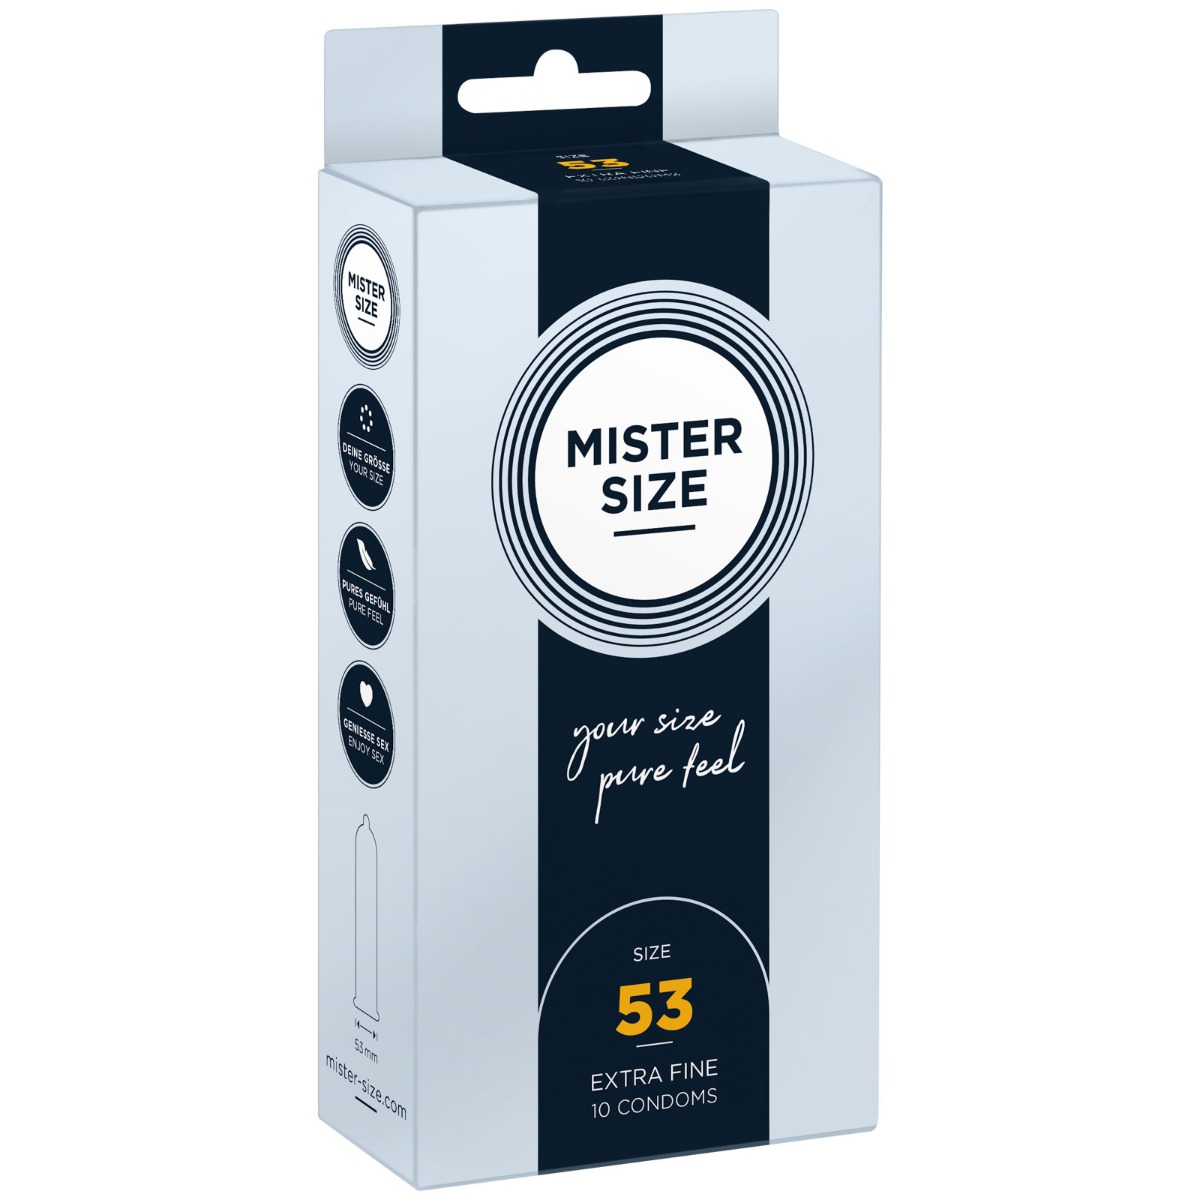 MISTER SIZE - pure feel Condoms - Size 53 mm (10 pack)